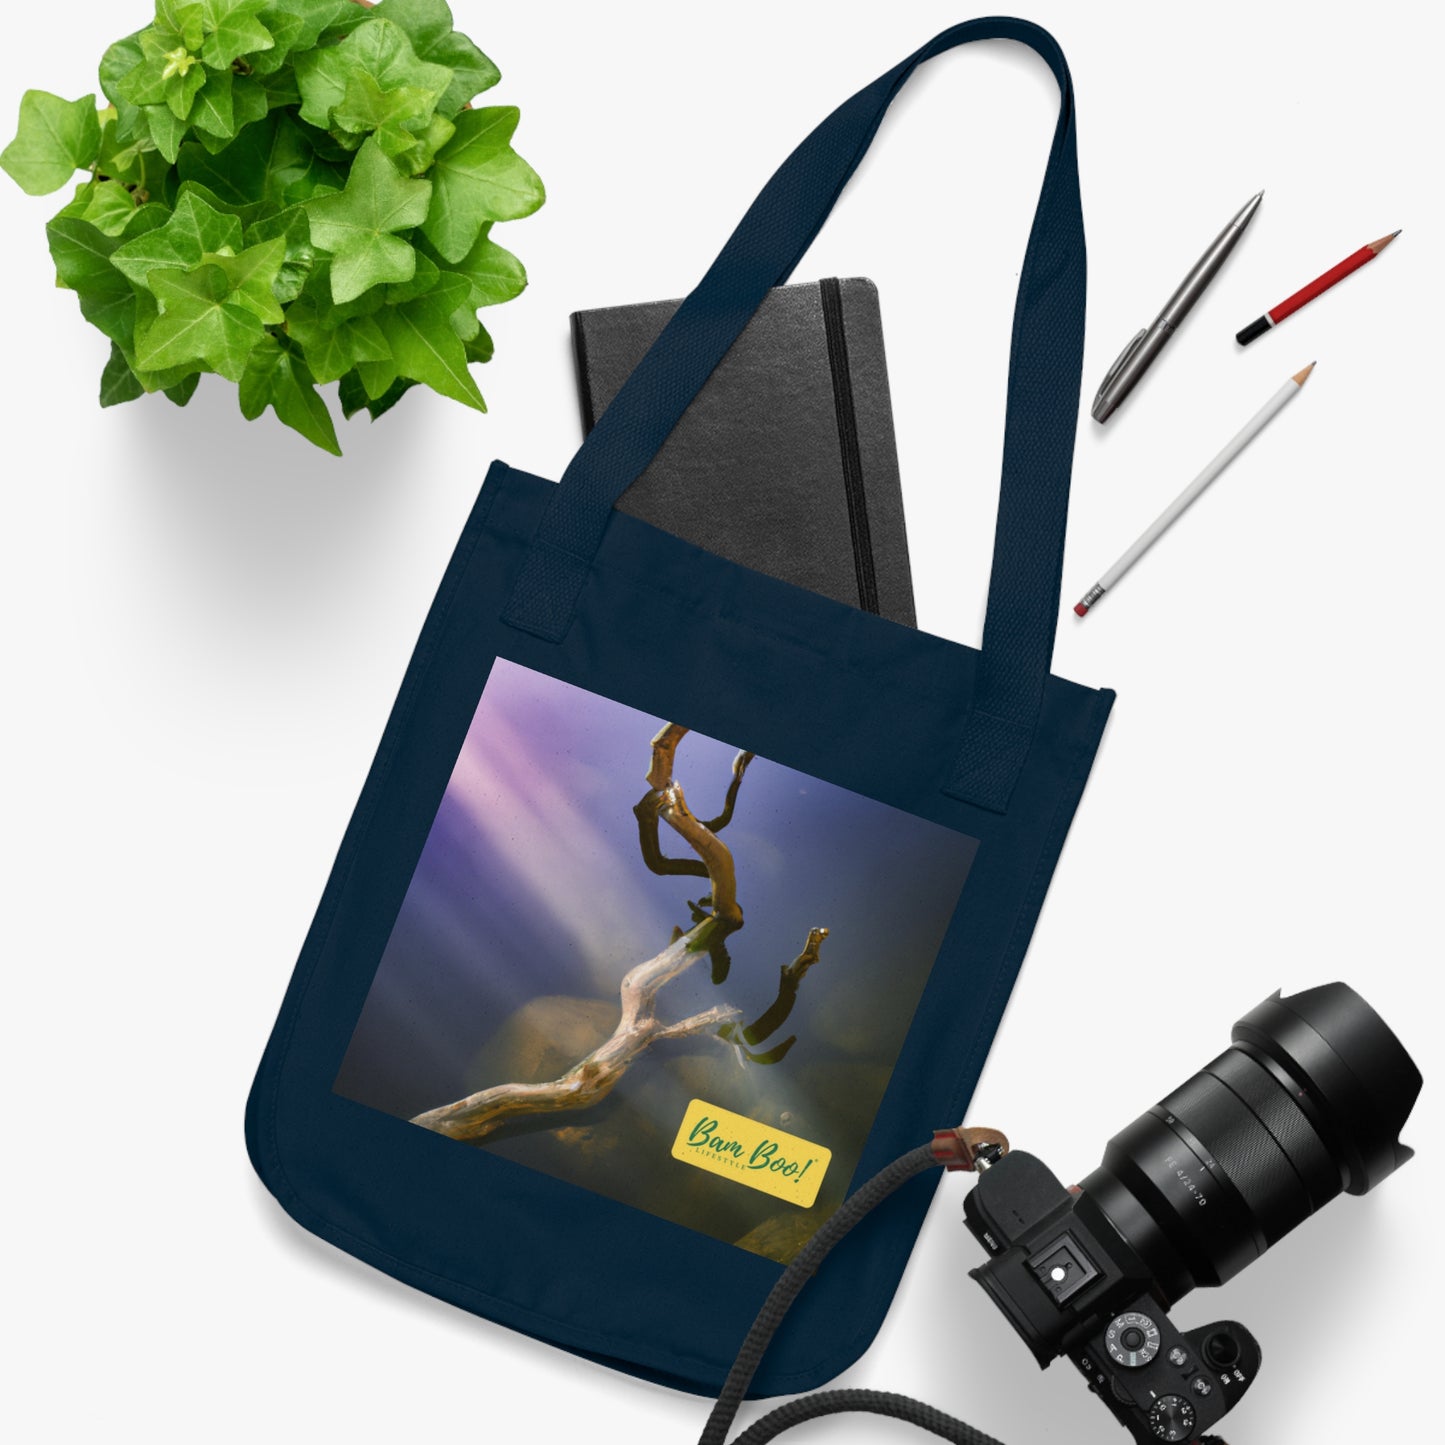 "Reflections of Nature in Art" - Bam Boo! Lifestyle Eco-friendly Tote Bag